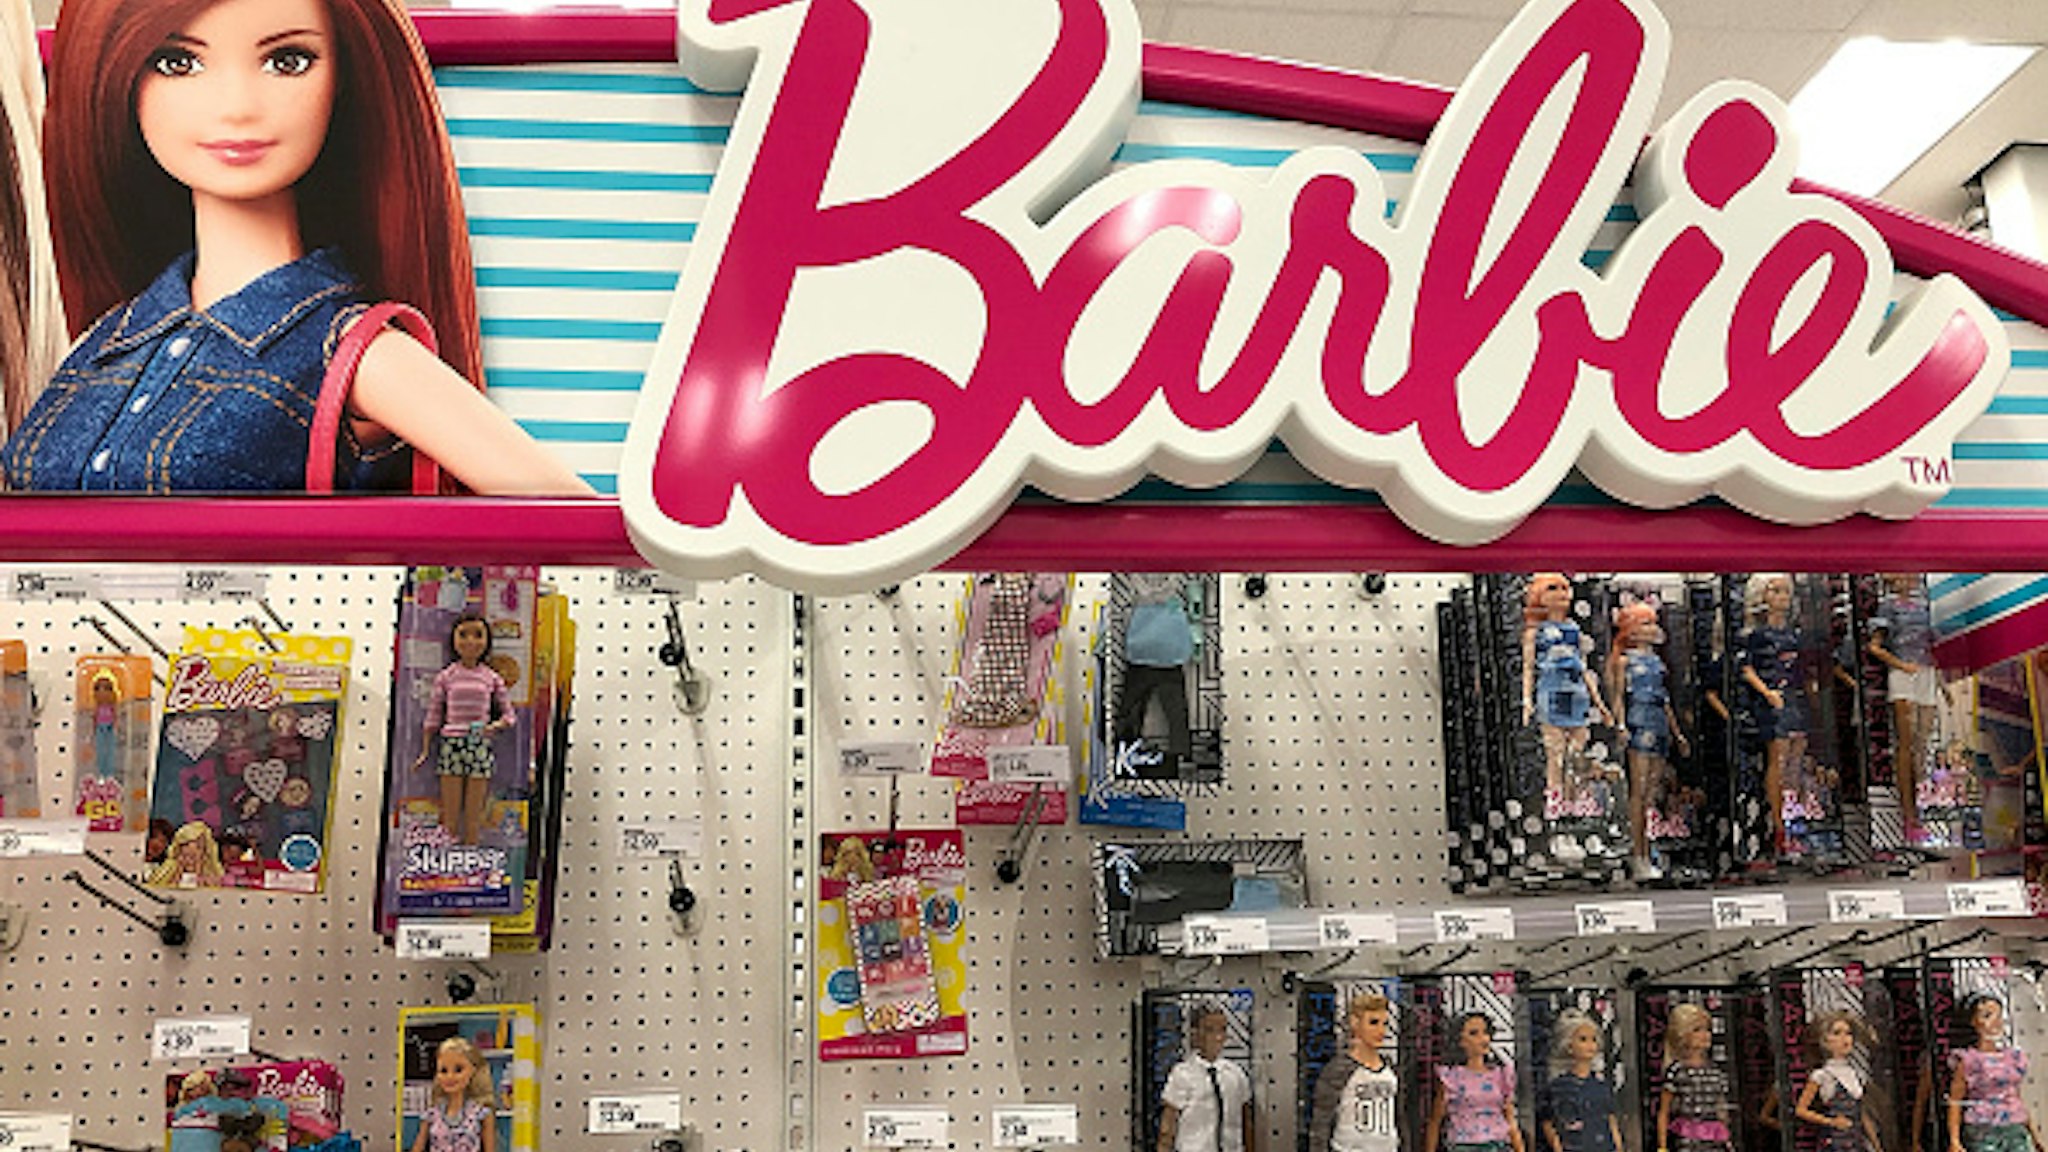 SAN RAFAEL, CA - JULY 25: Barbie dolls, made by Mattel, are displayed on a shelf at a Target store on July 25, 2018 in San Rafael, California. Toy maker Mattel announced plans to cut 2,200 non-manufacturing jobs after reporting a $240.9 million loss in its second quarter earnings.